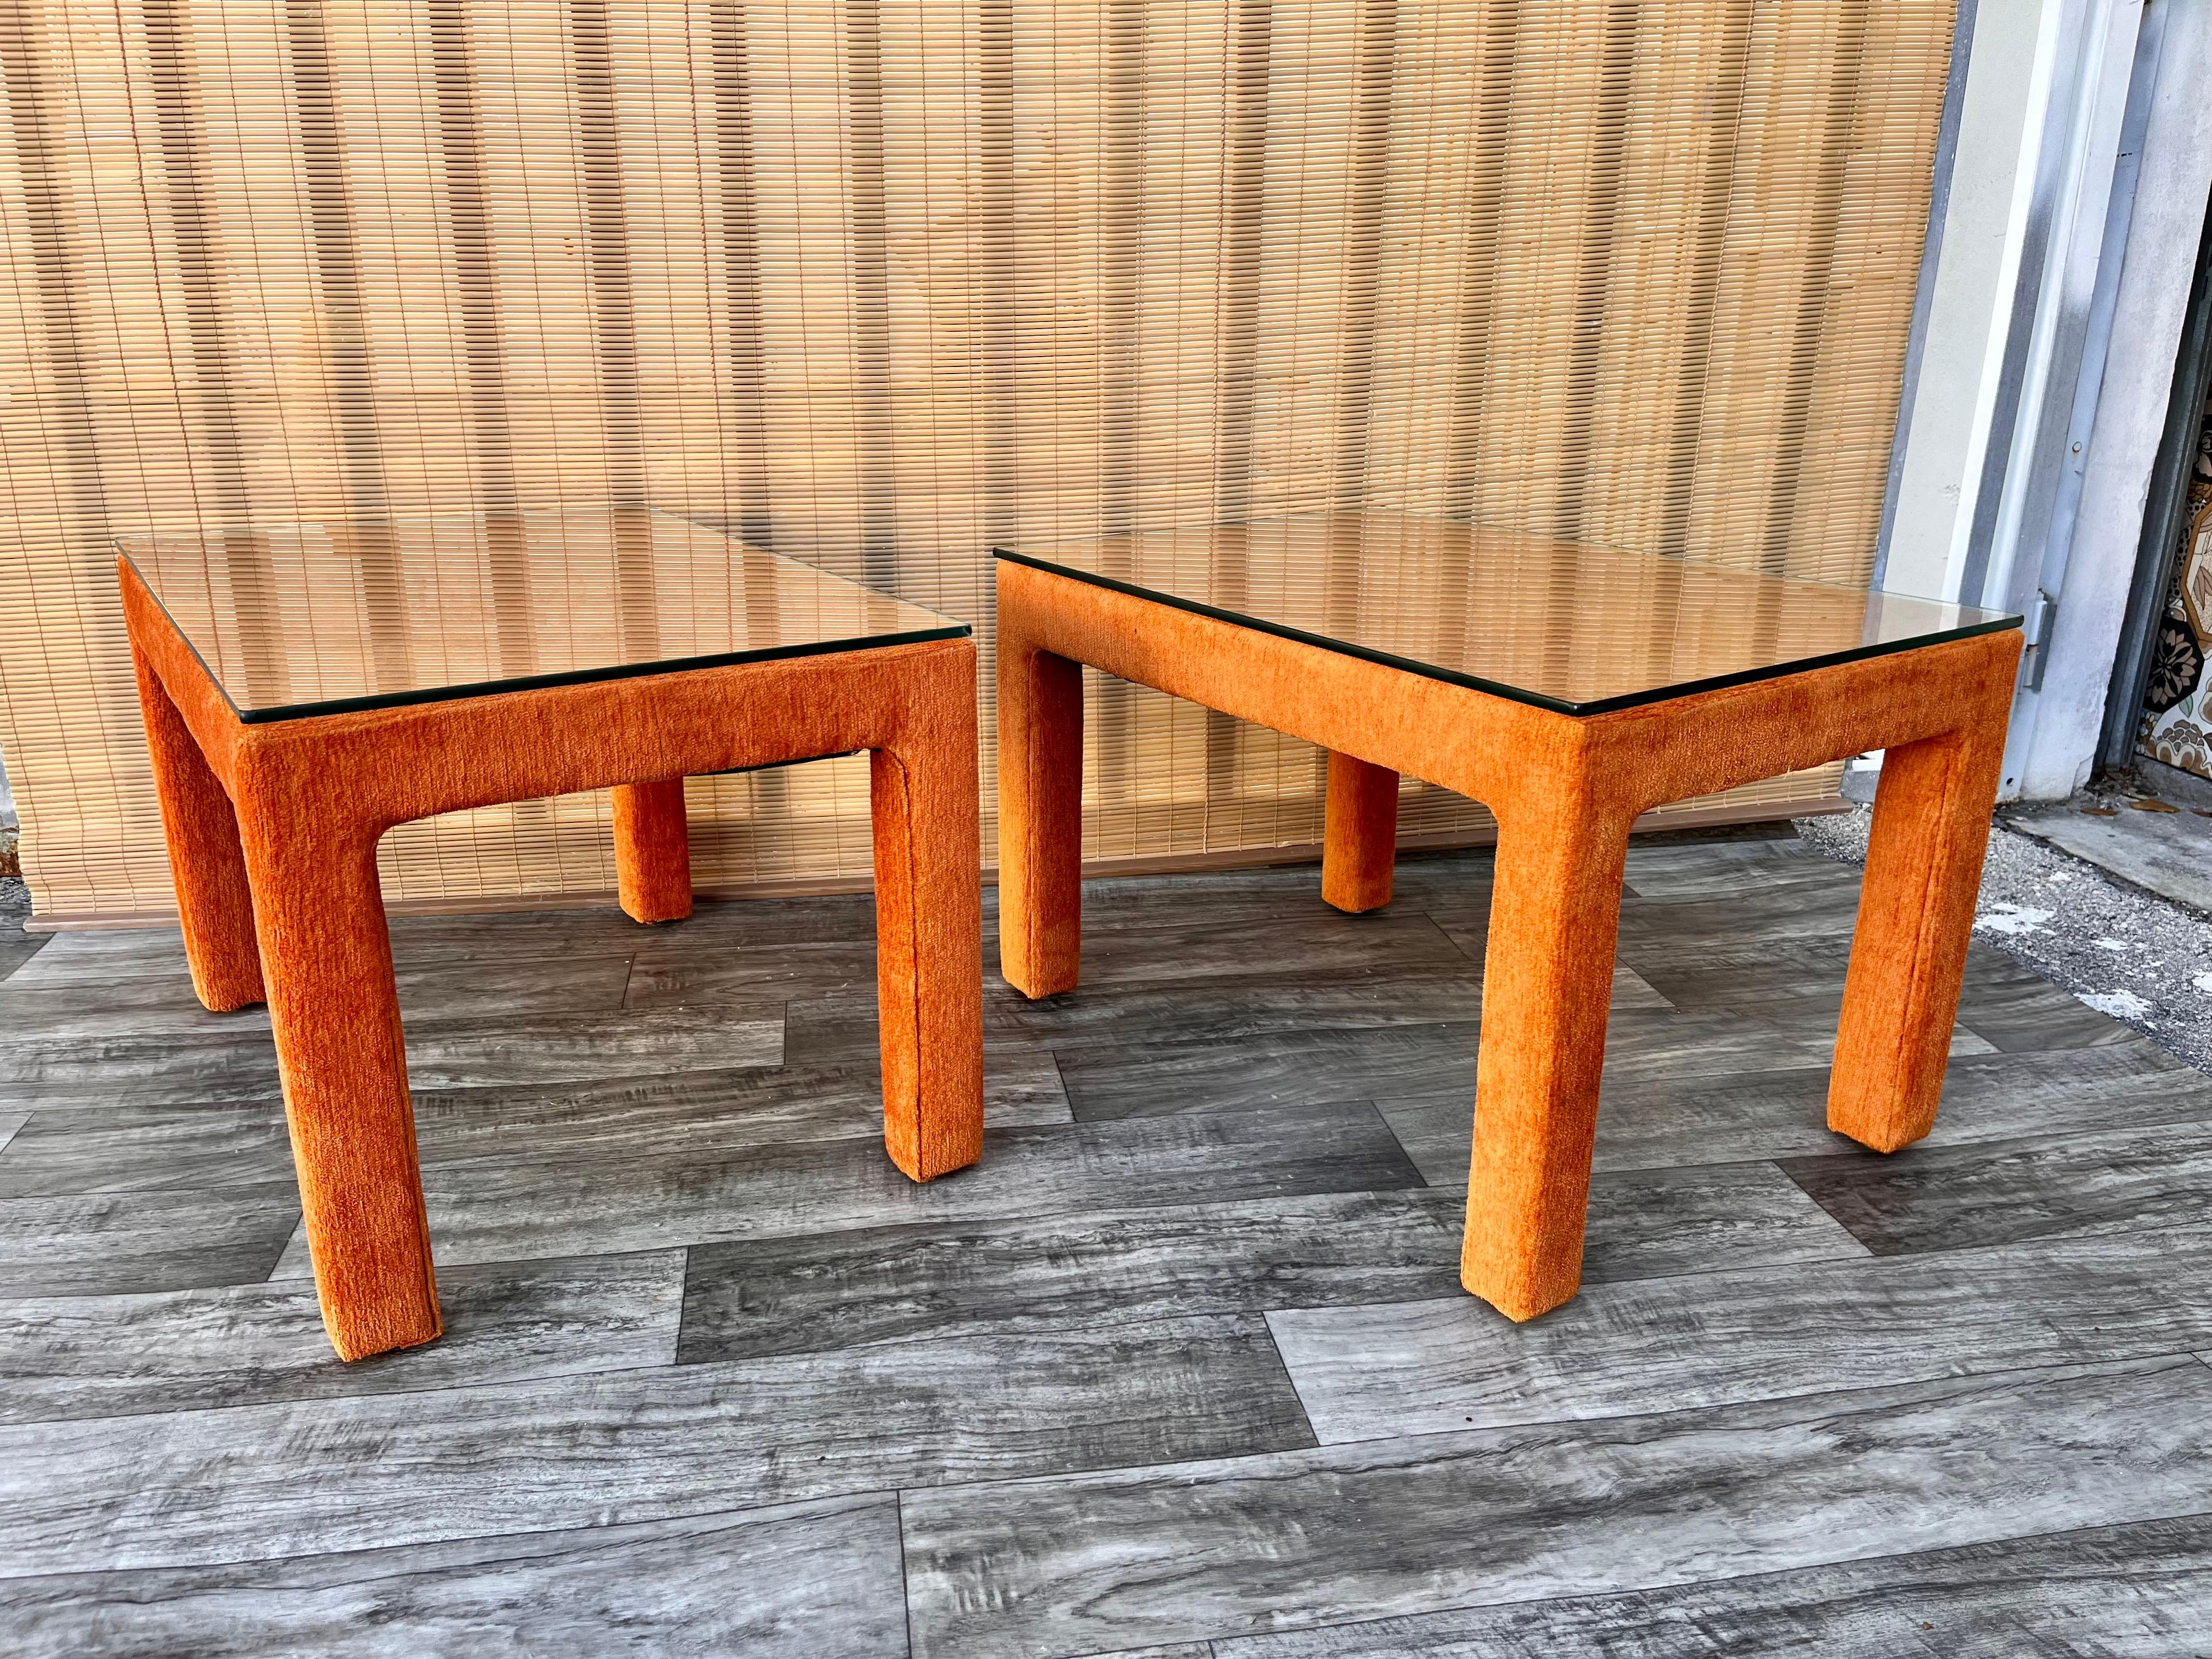 Pair of Mid-Century Modern Fully Upholstered Side Tables, circa 1970s For Sale 1